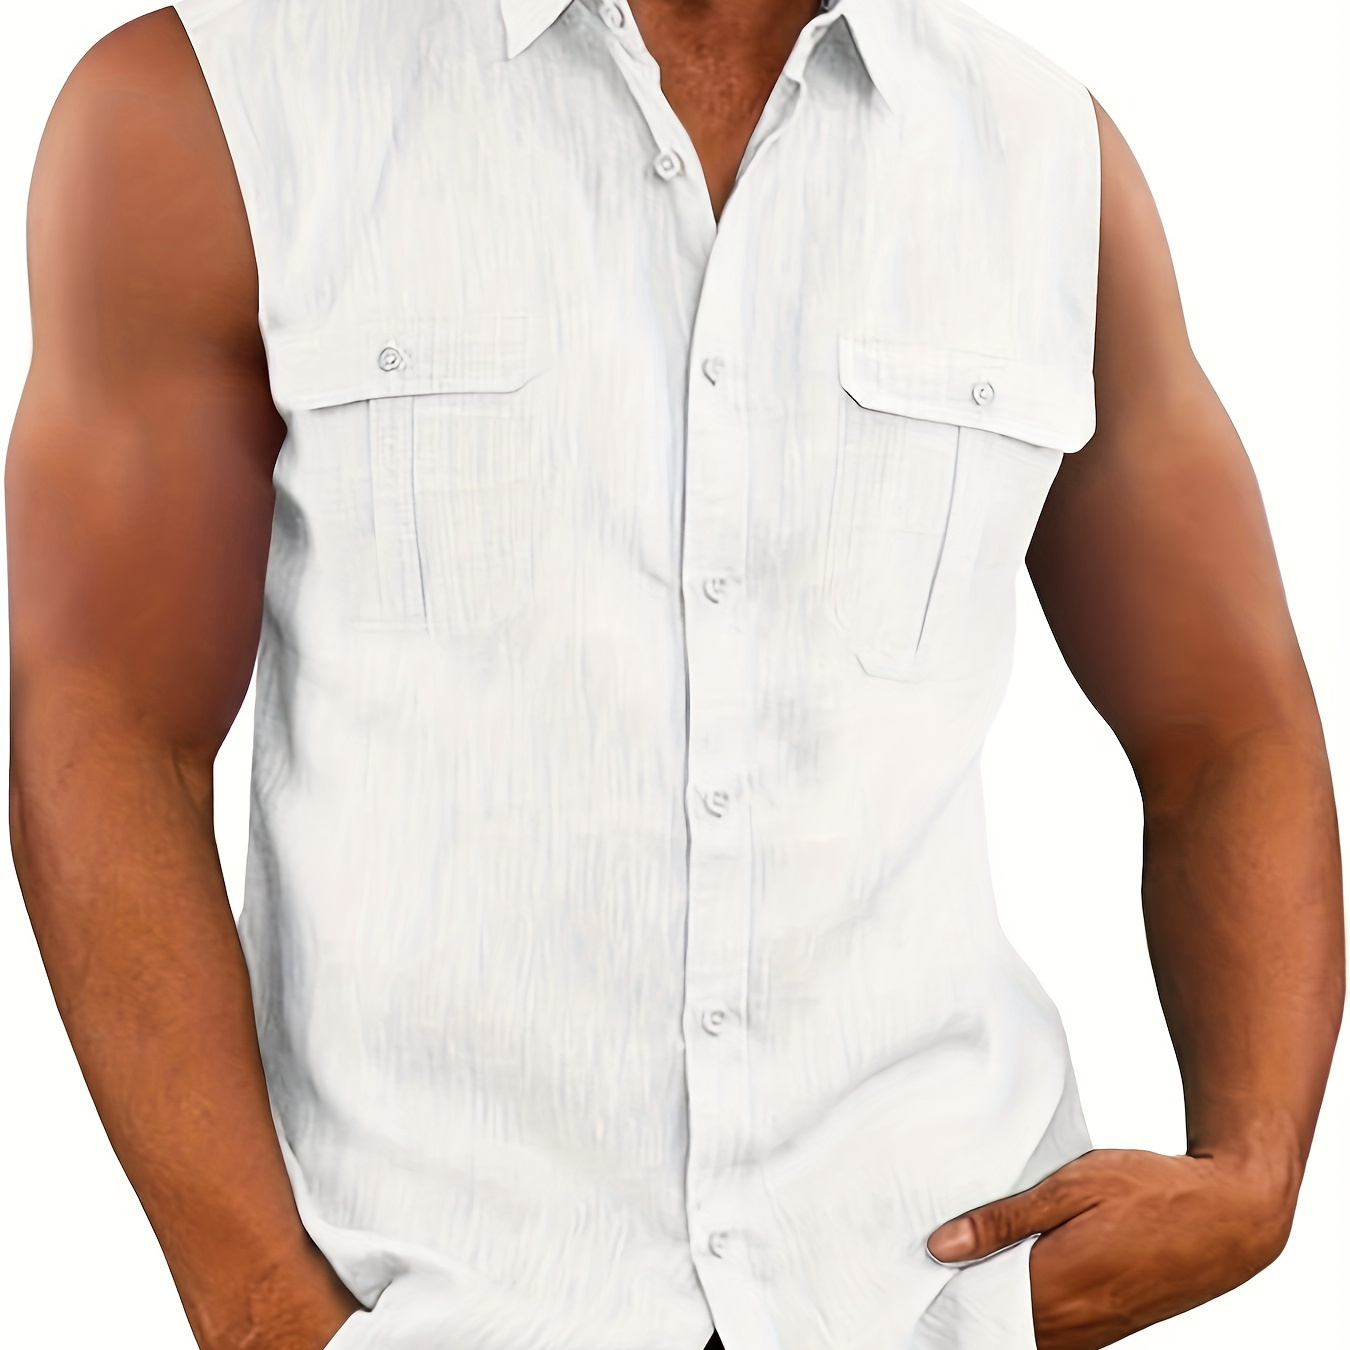 

Men's Sleeveless Button-up Shirt In Solid Color, Summer Beach Basics, Casual Sleeveless Vest Top